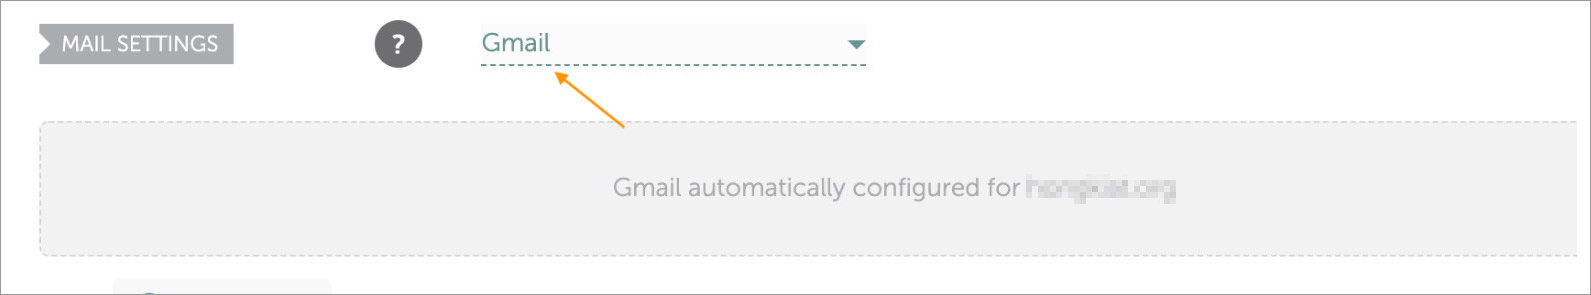 mail settings to gmail